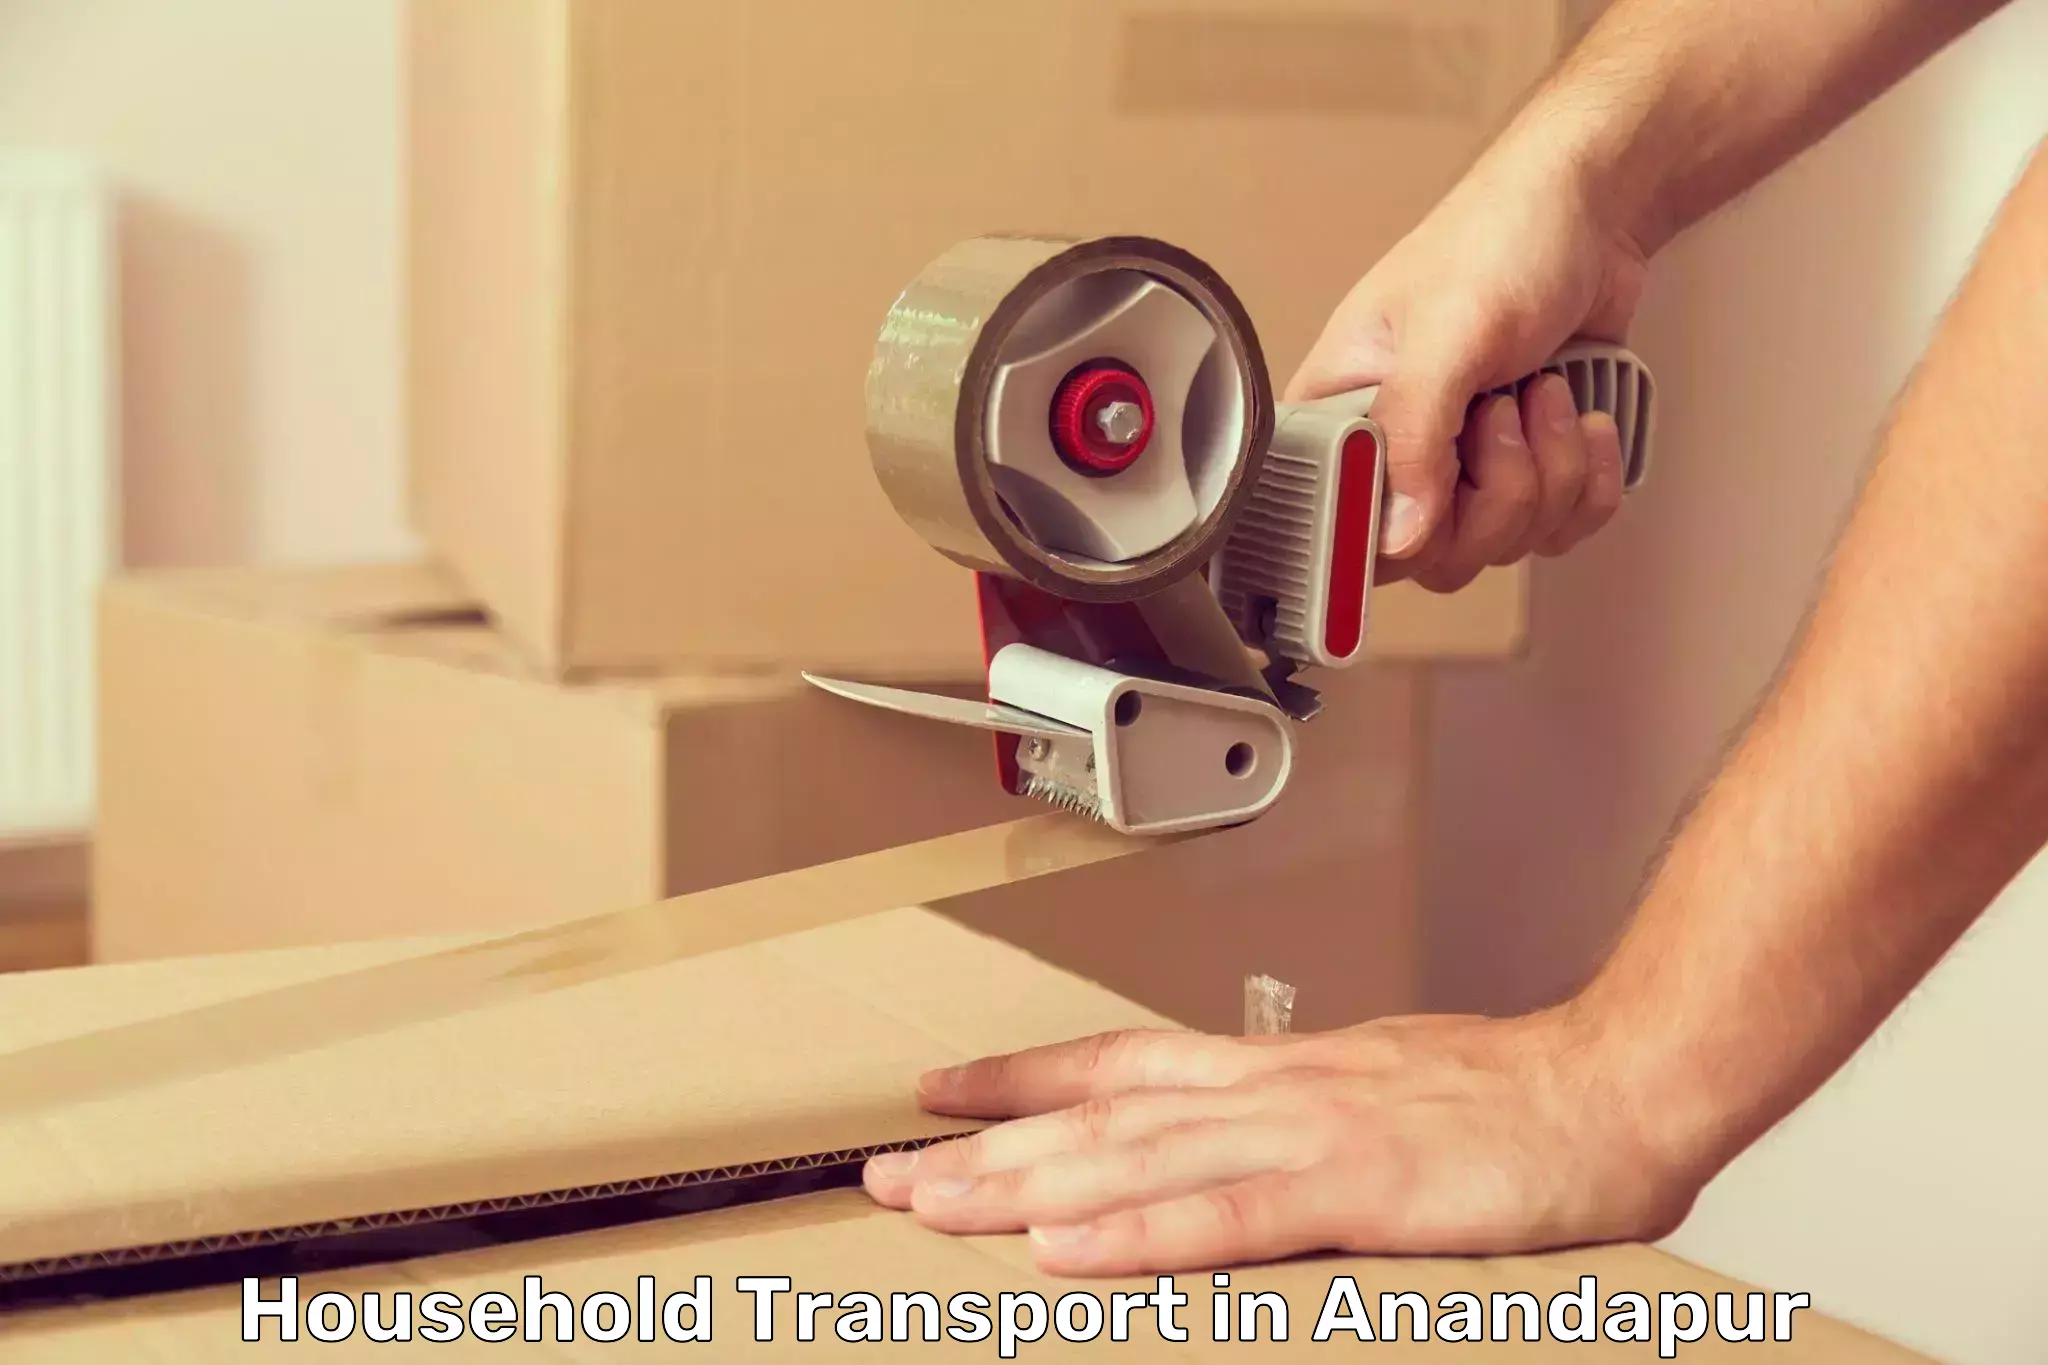 Skilled furniture transporters in Anandapur